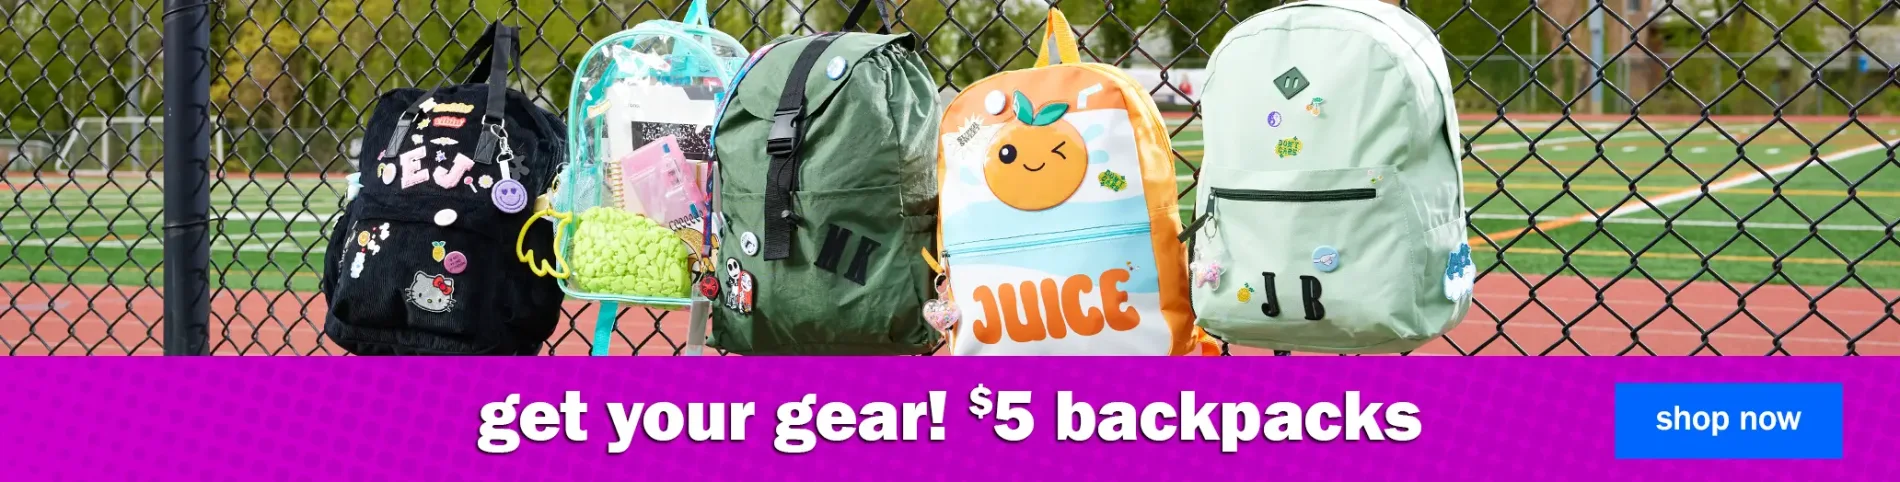 Get Your Gear! $5 Backpacks. Shop Now.